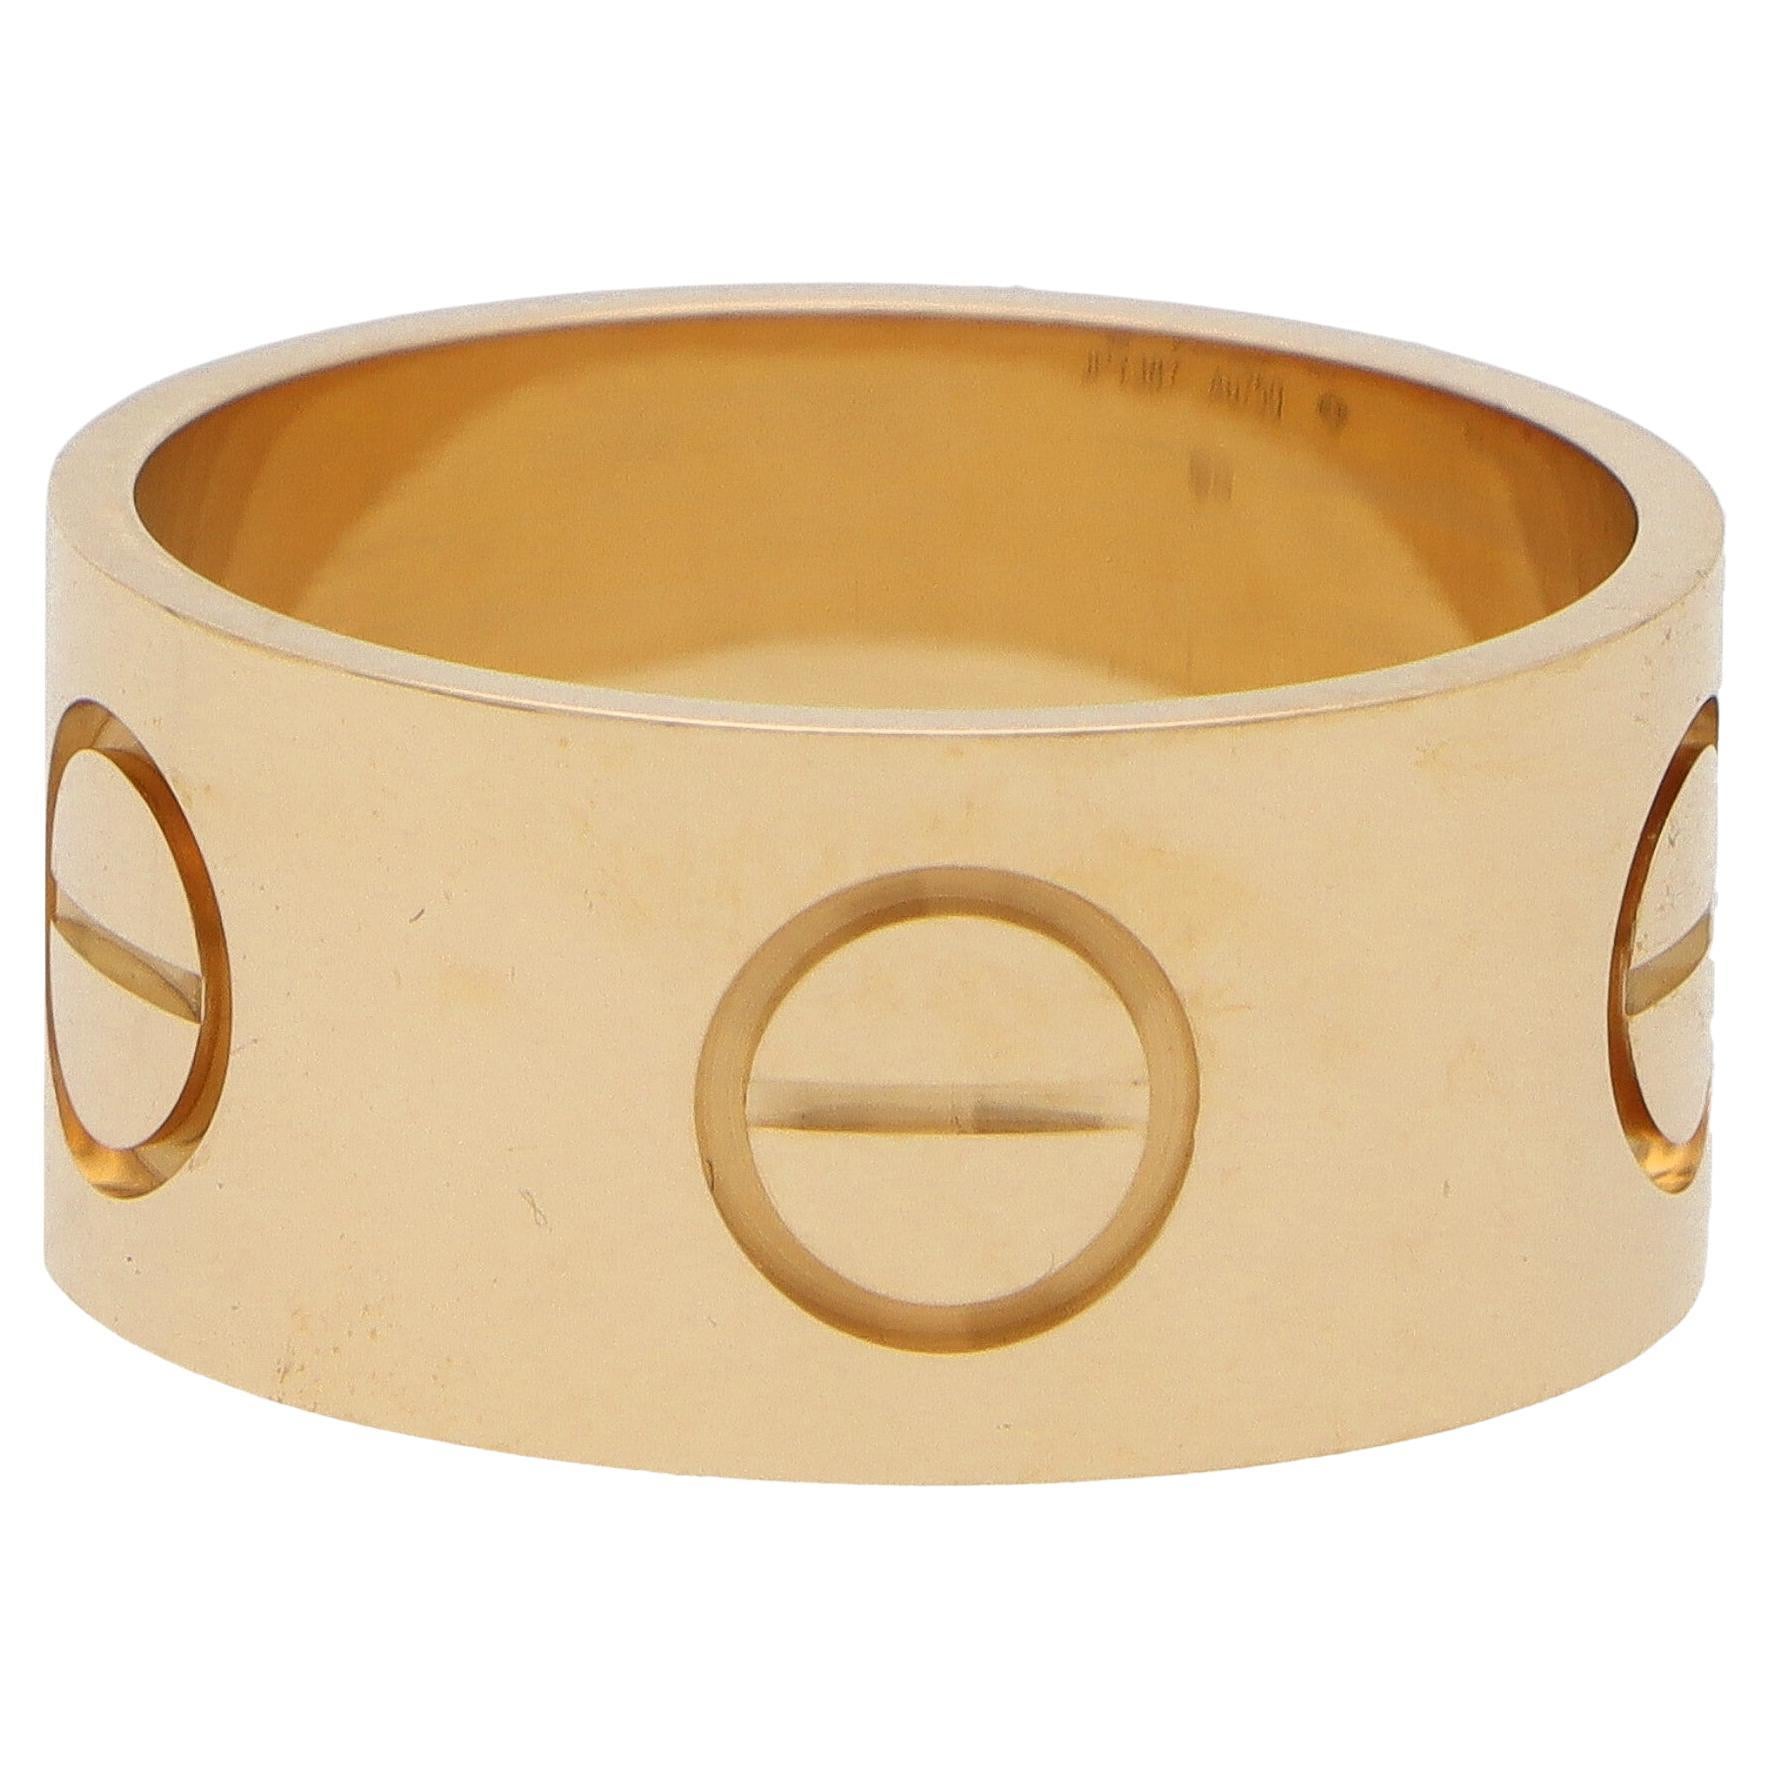 Vintage Cartier Wide Love Ring in 18k Yellow Gold